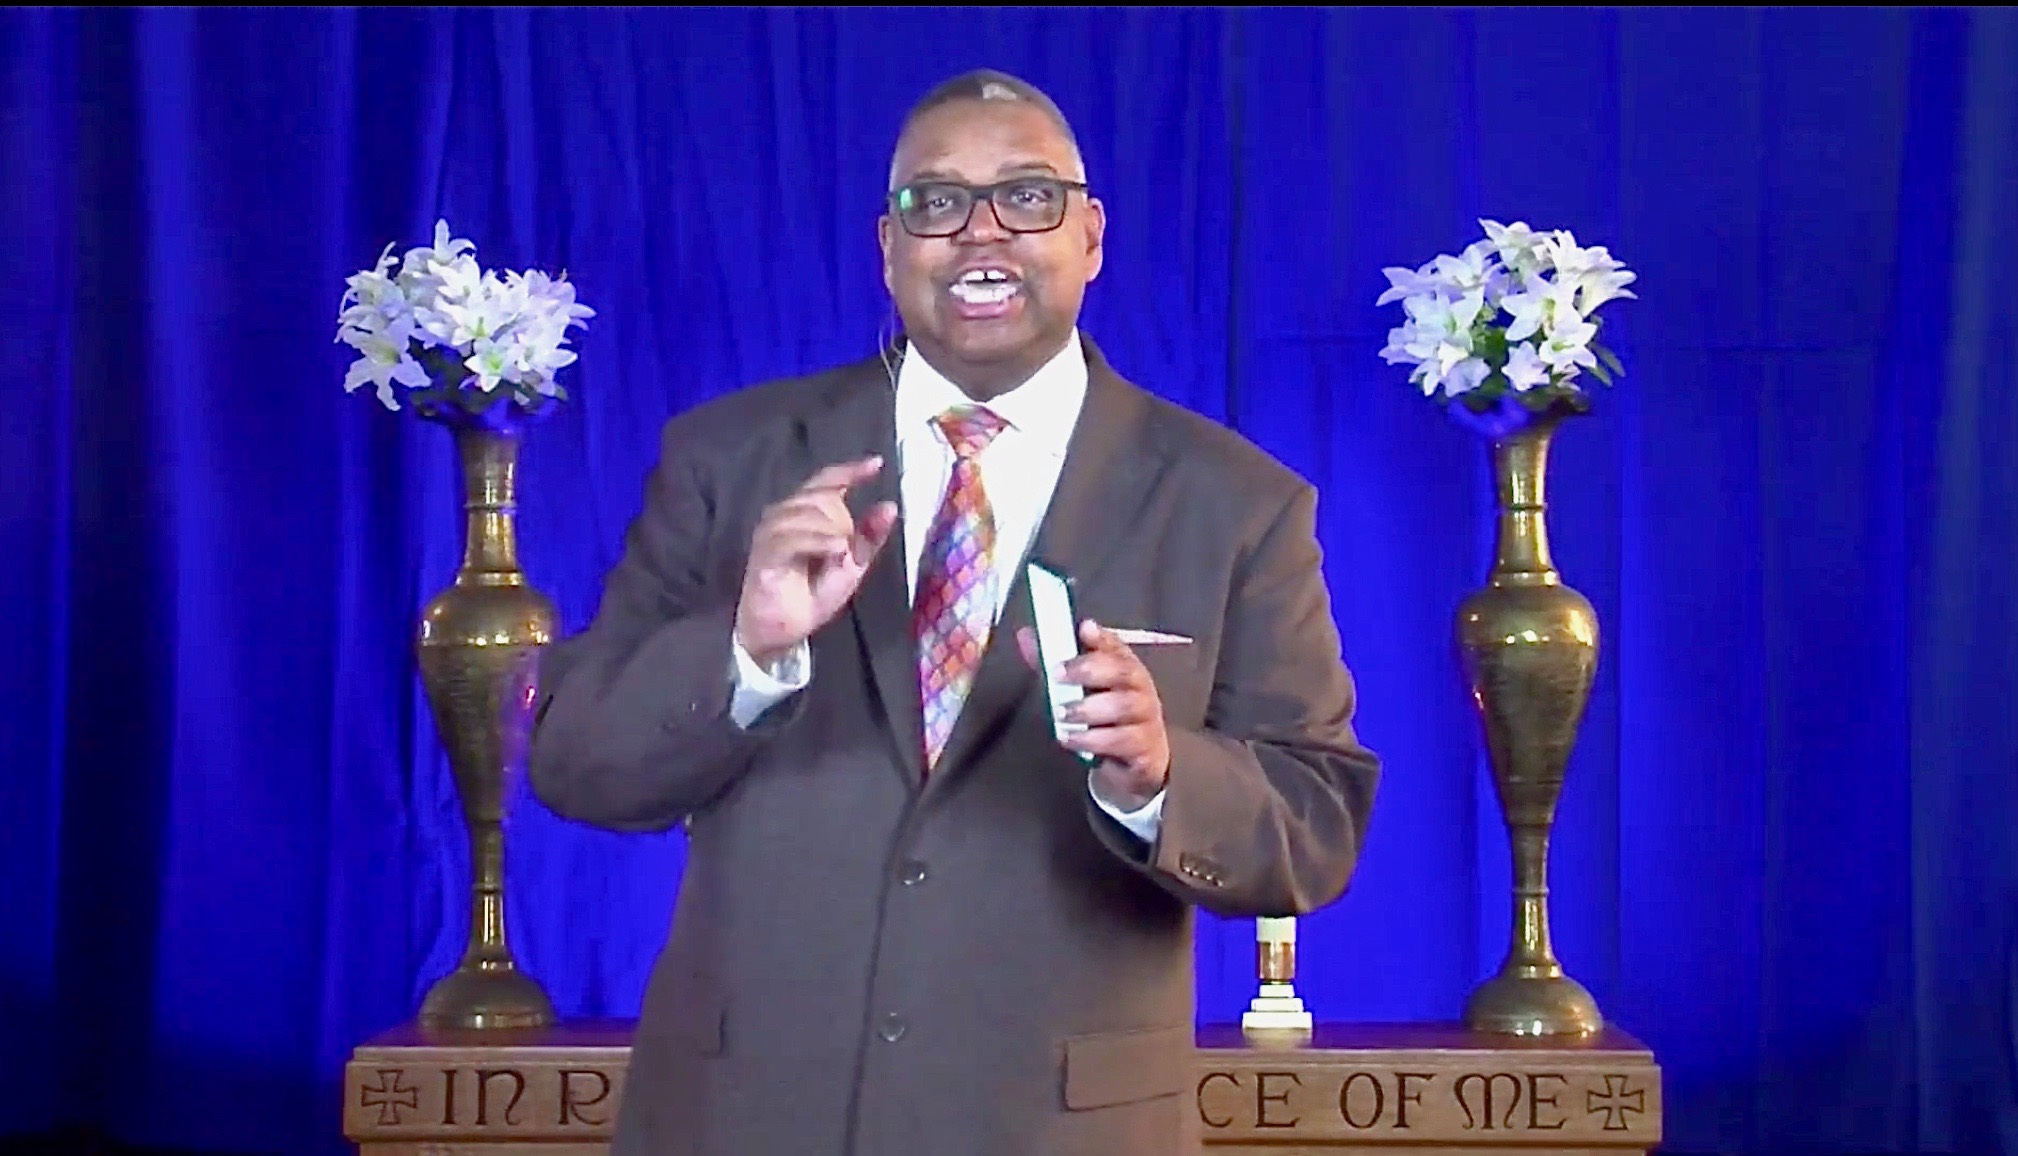 John E Cager III conducts his online sermon